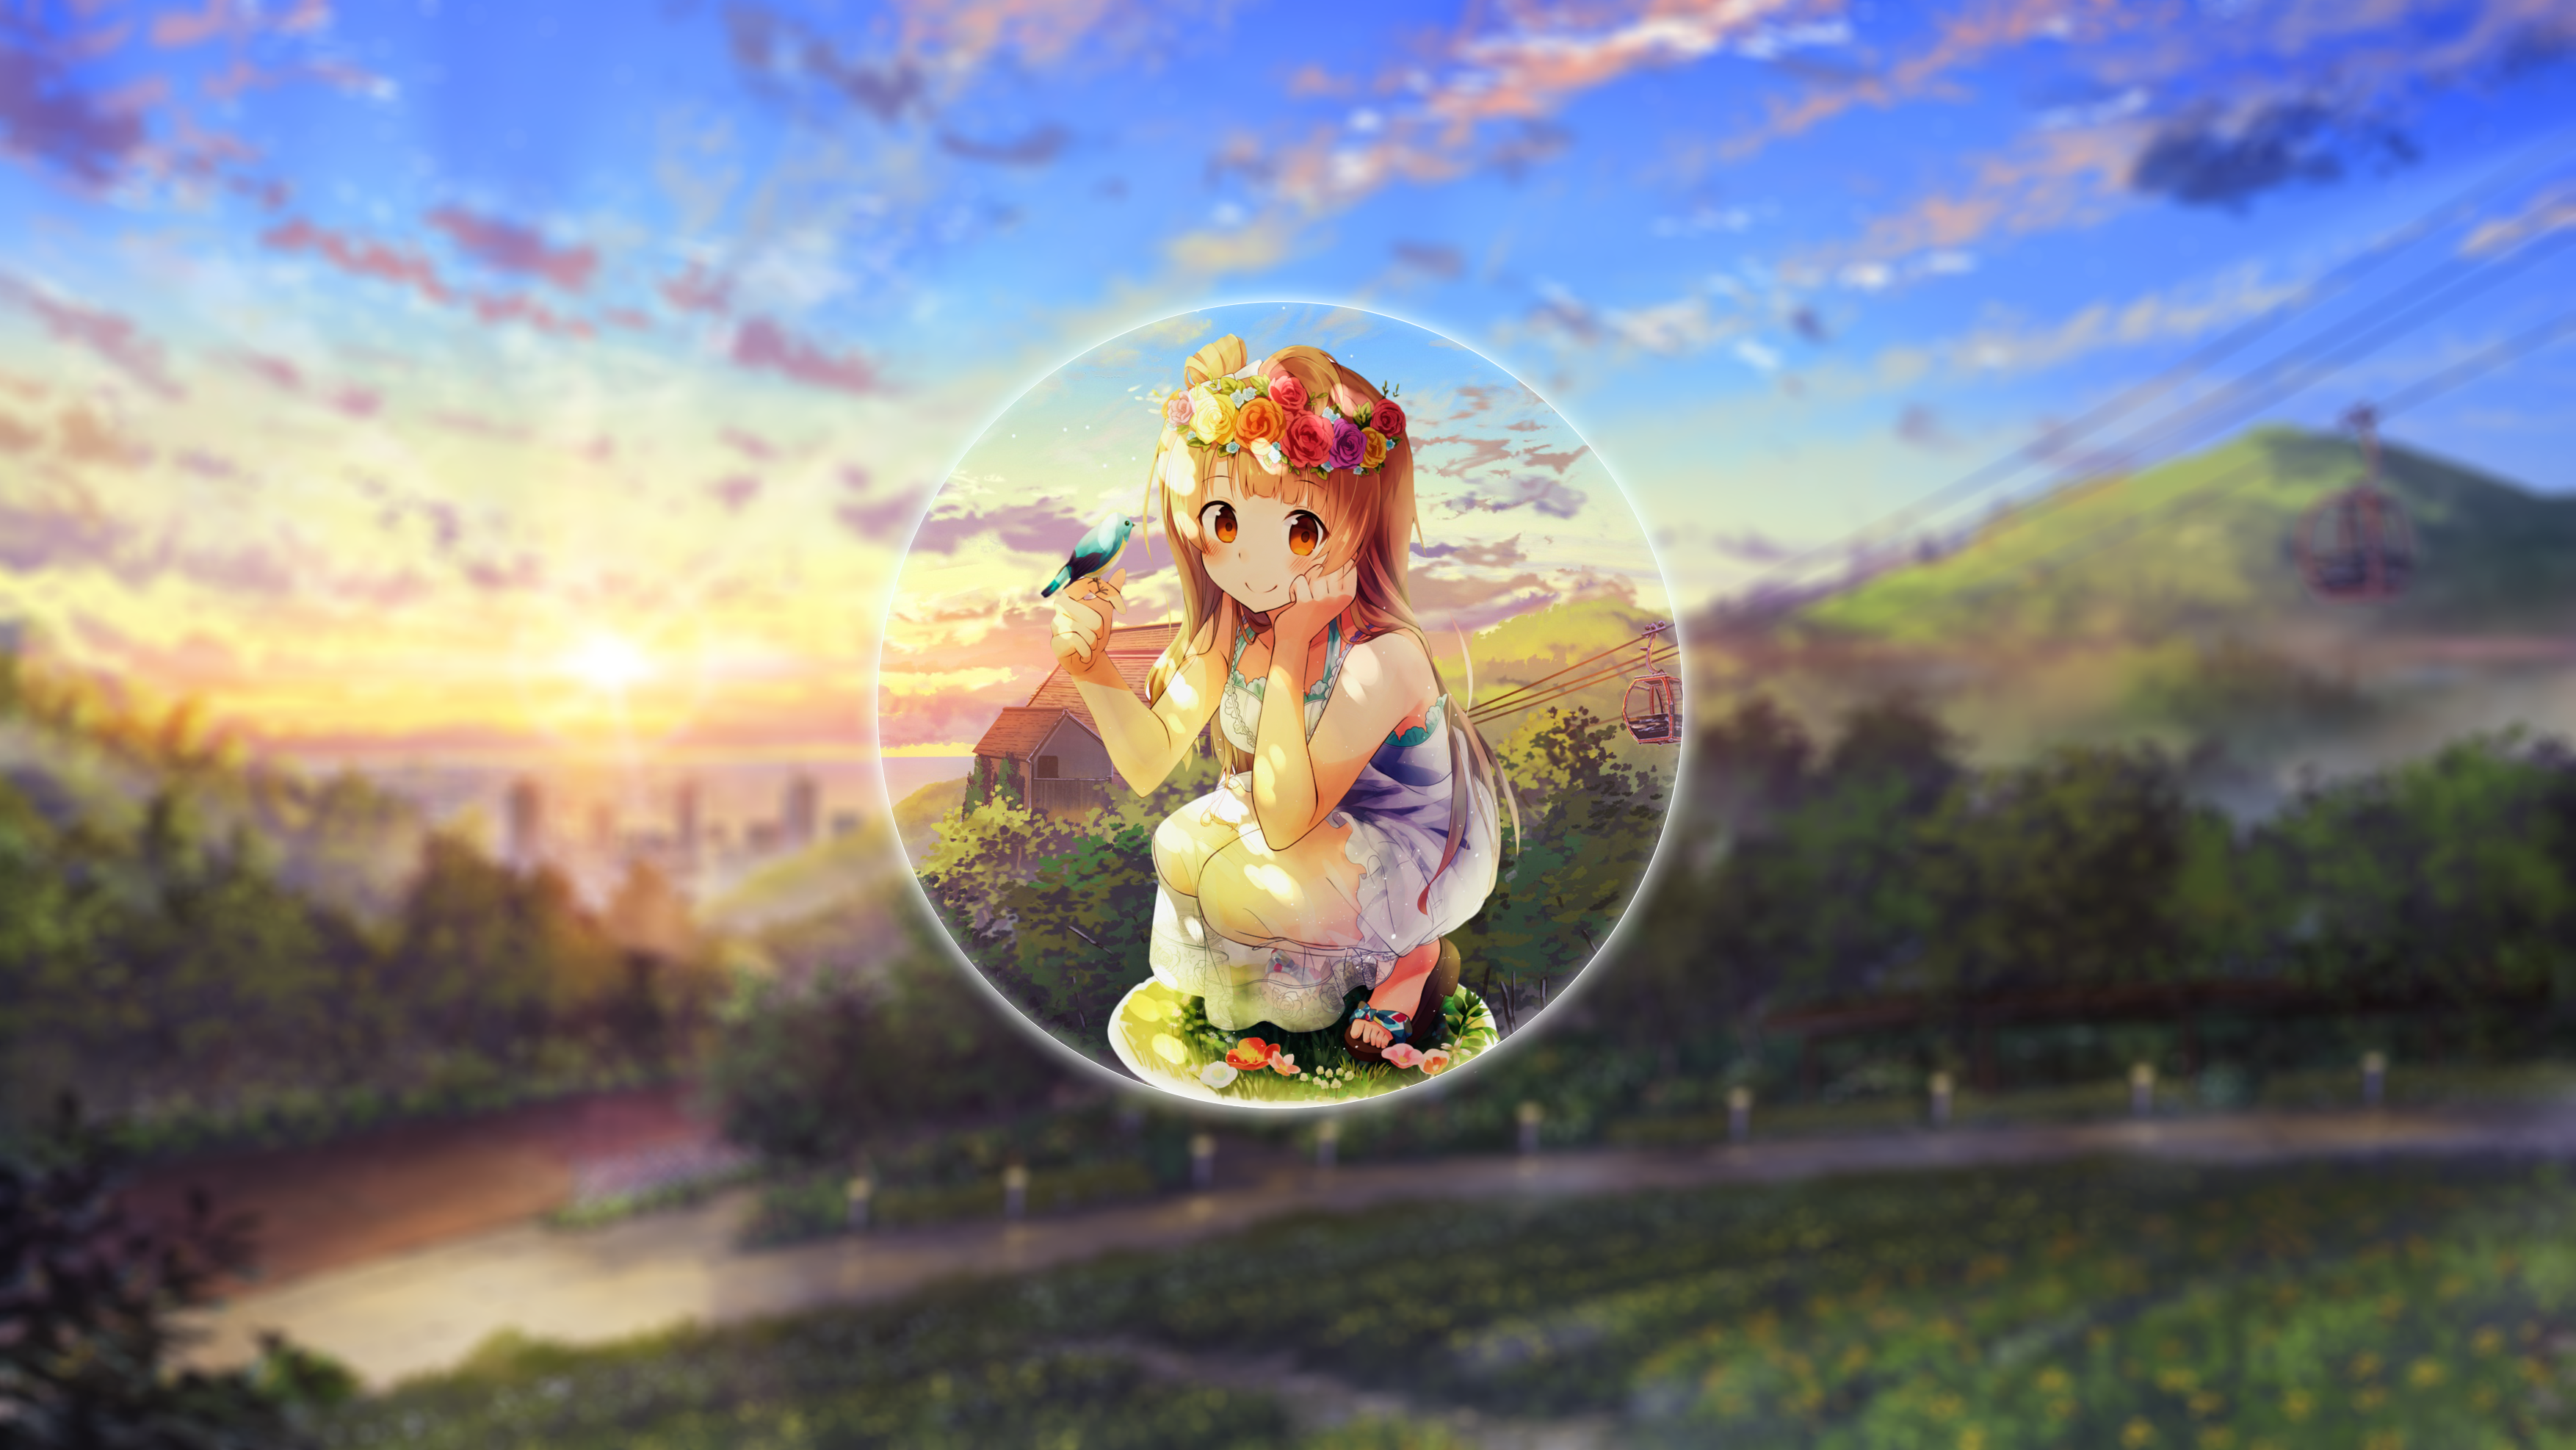 Anime Anime Girls Nature Minami Kotori Love Live Picture In Picture Summer Evening Flower In Hair Bi 3508x1974